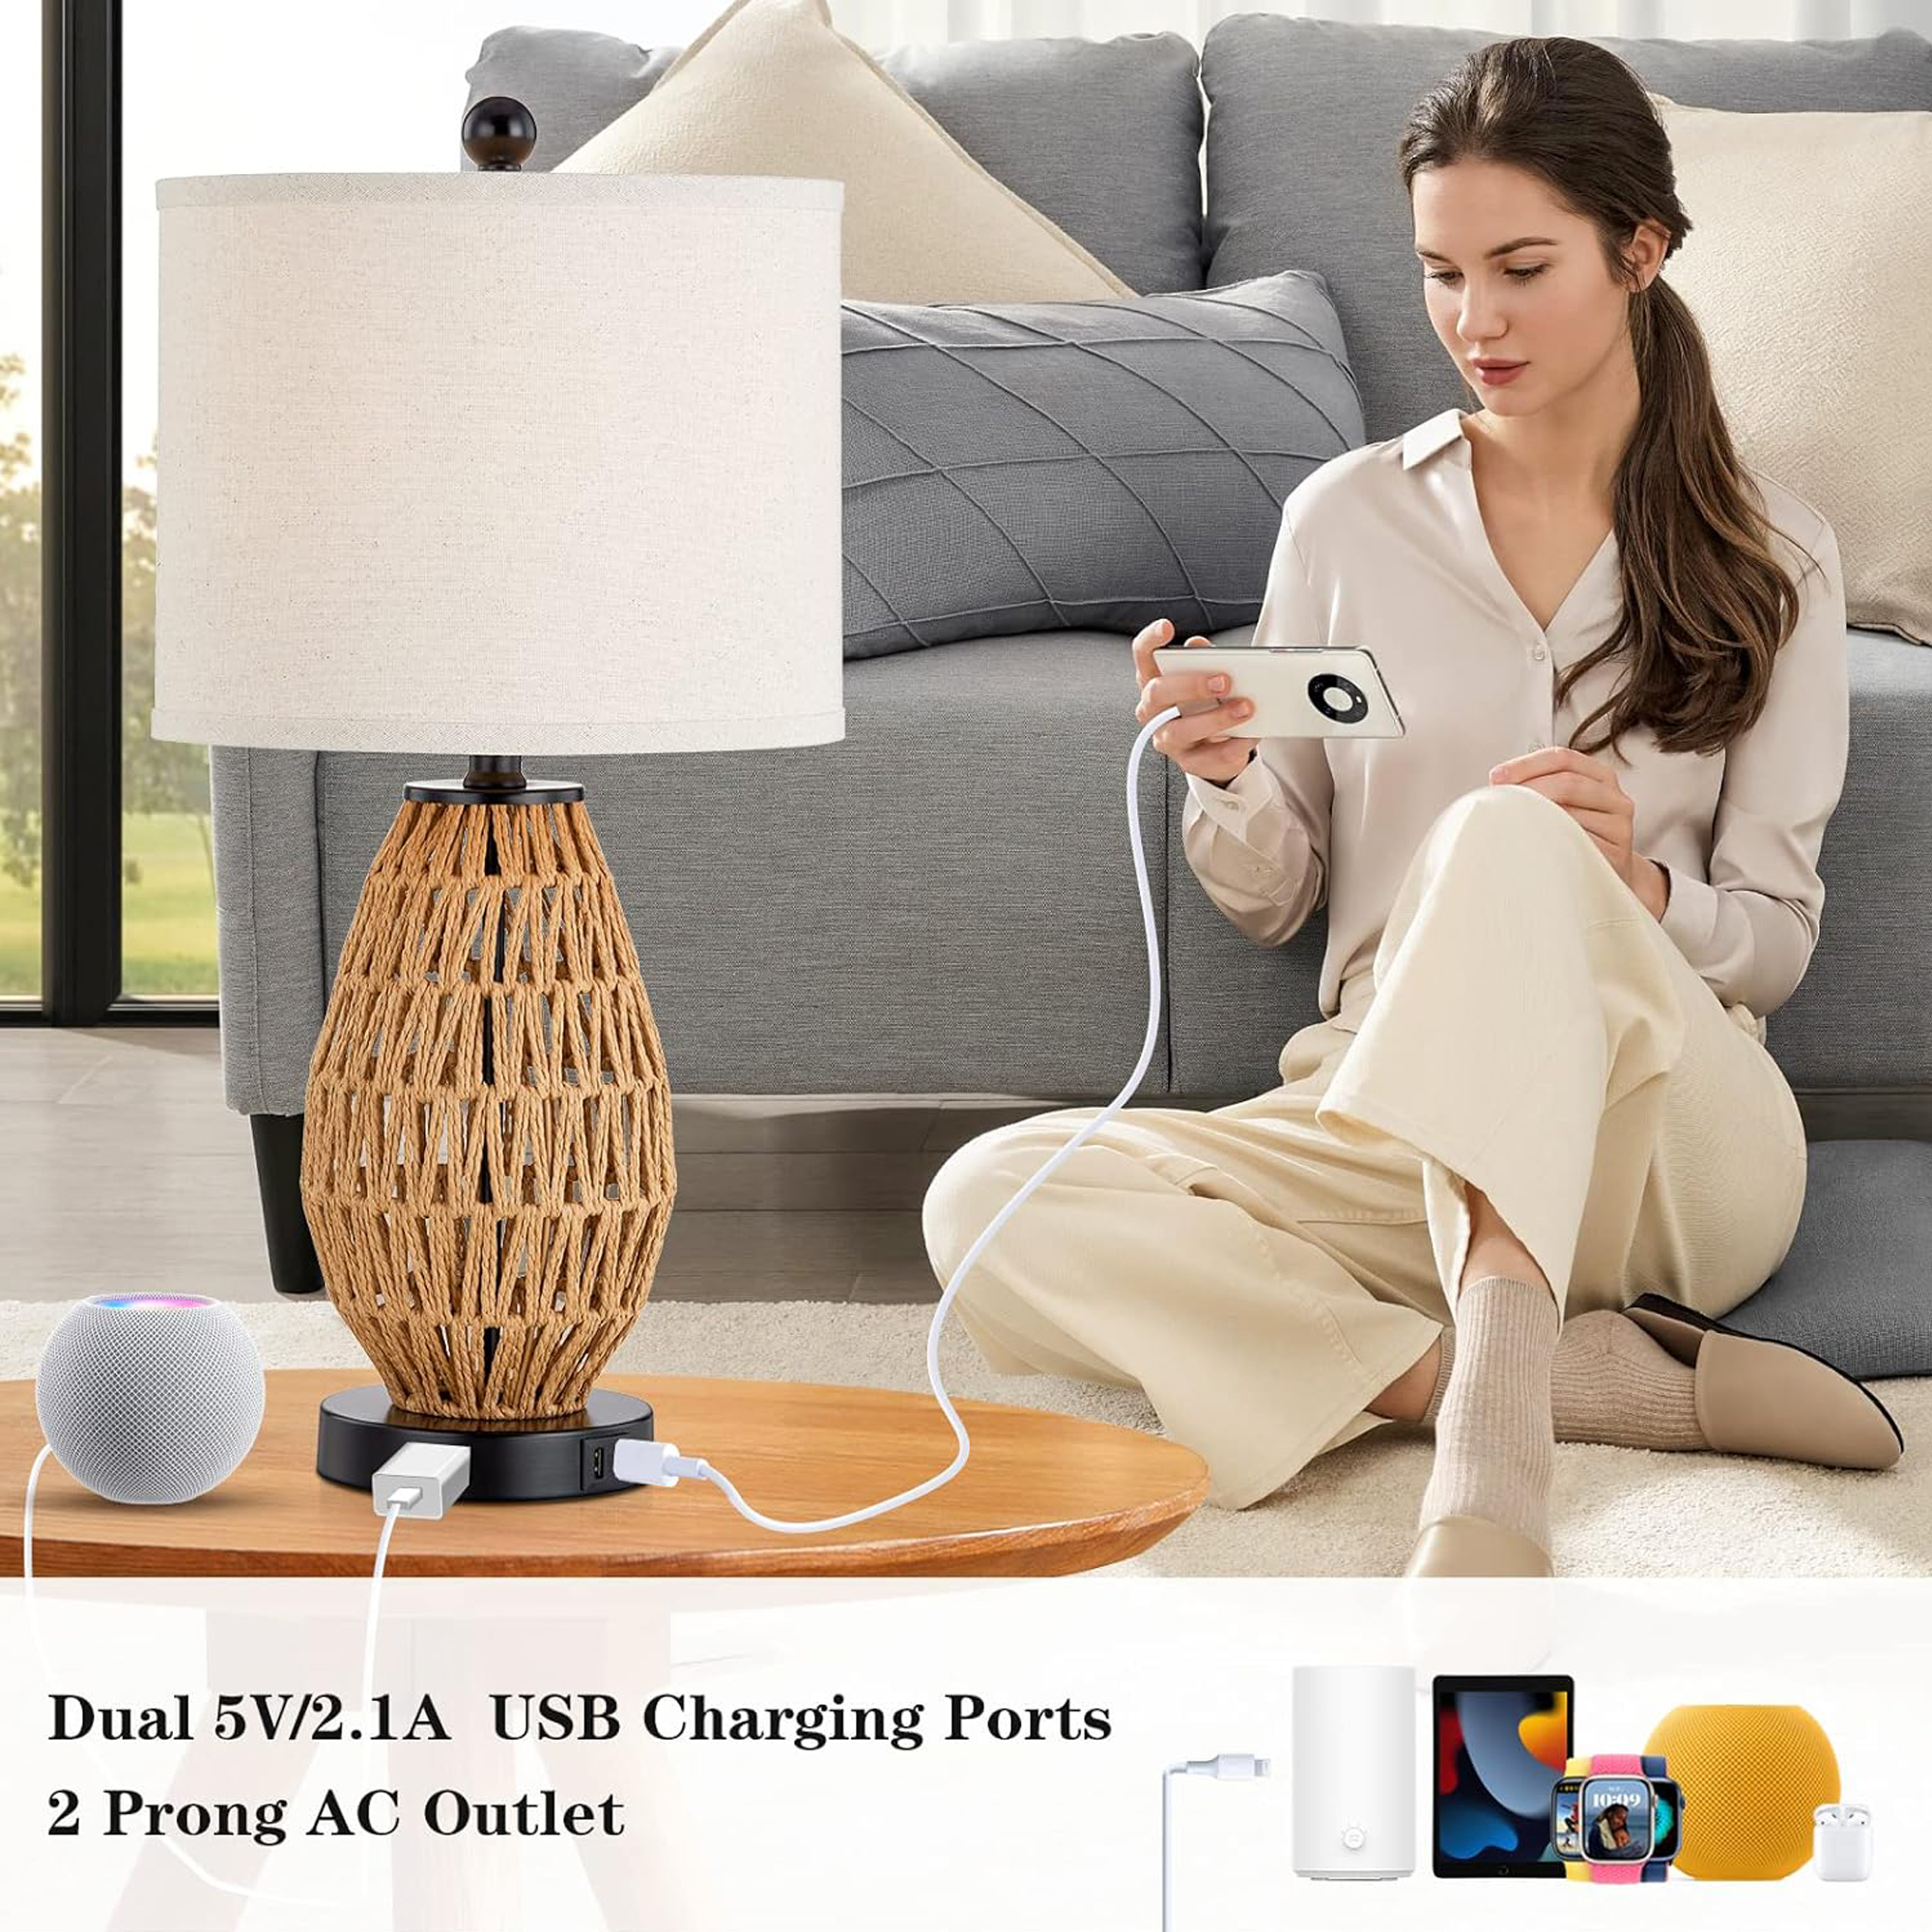 Cinkeda Touch Control Table Lamp with USB Ports AC Outlet Oatmeal Braided Rattan 3 Way Dimmable Bedside Lamp for Living Room Bedroom(1 Bulb) - image 4 of 8